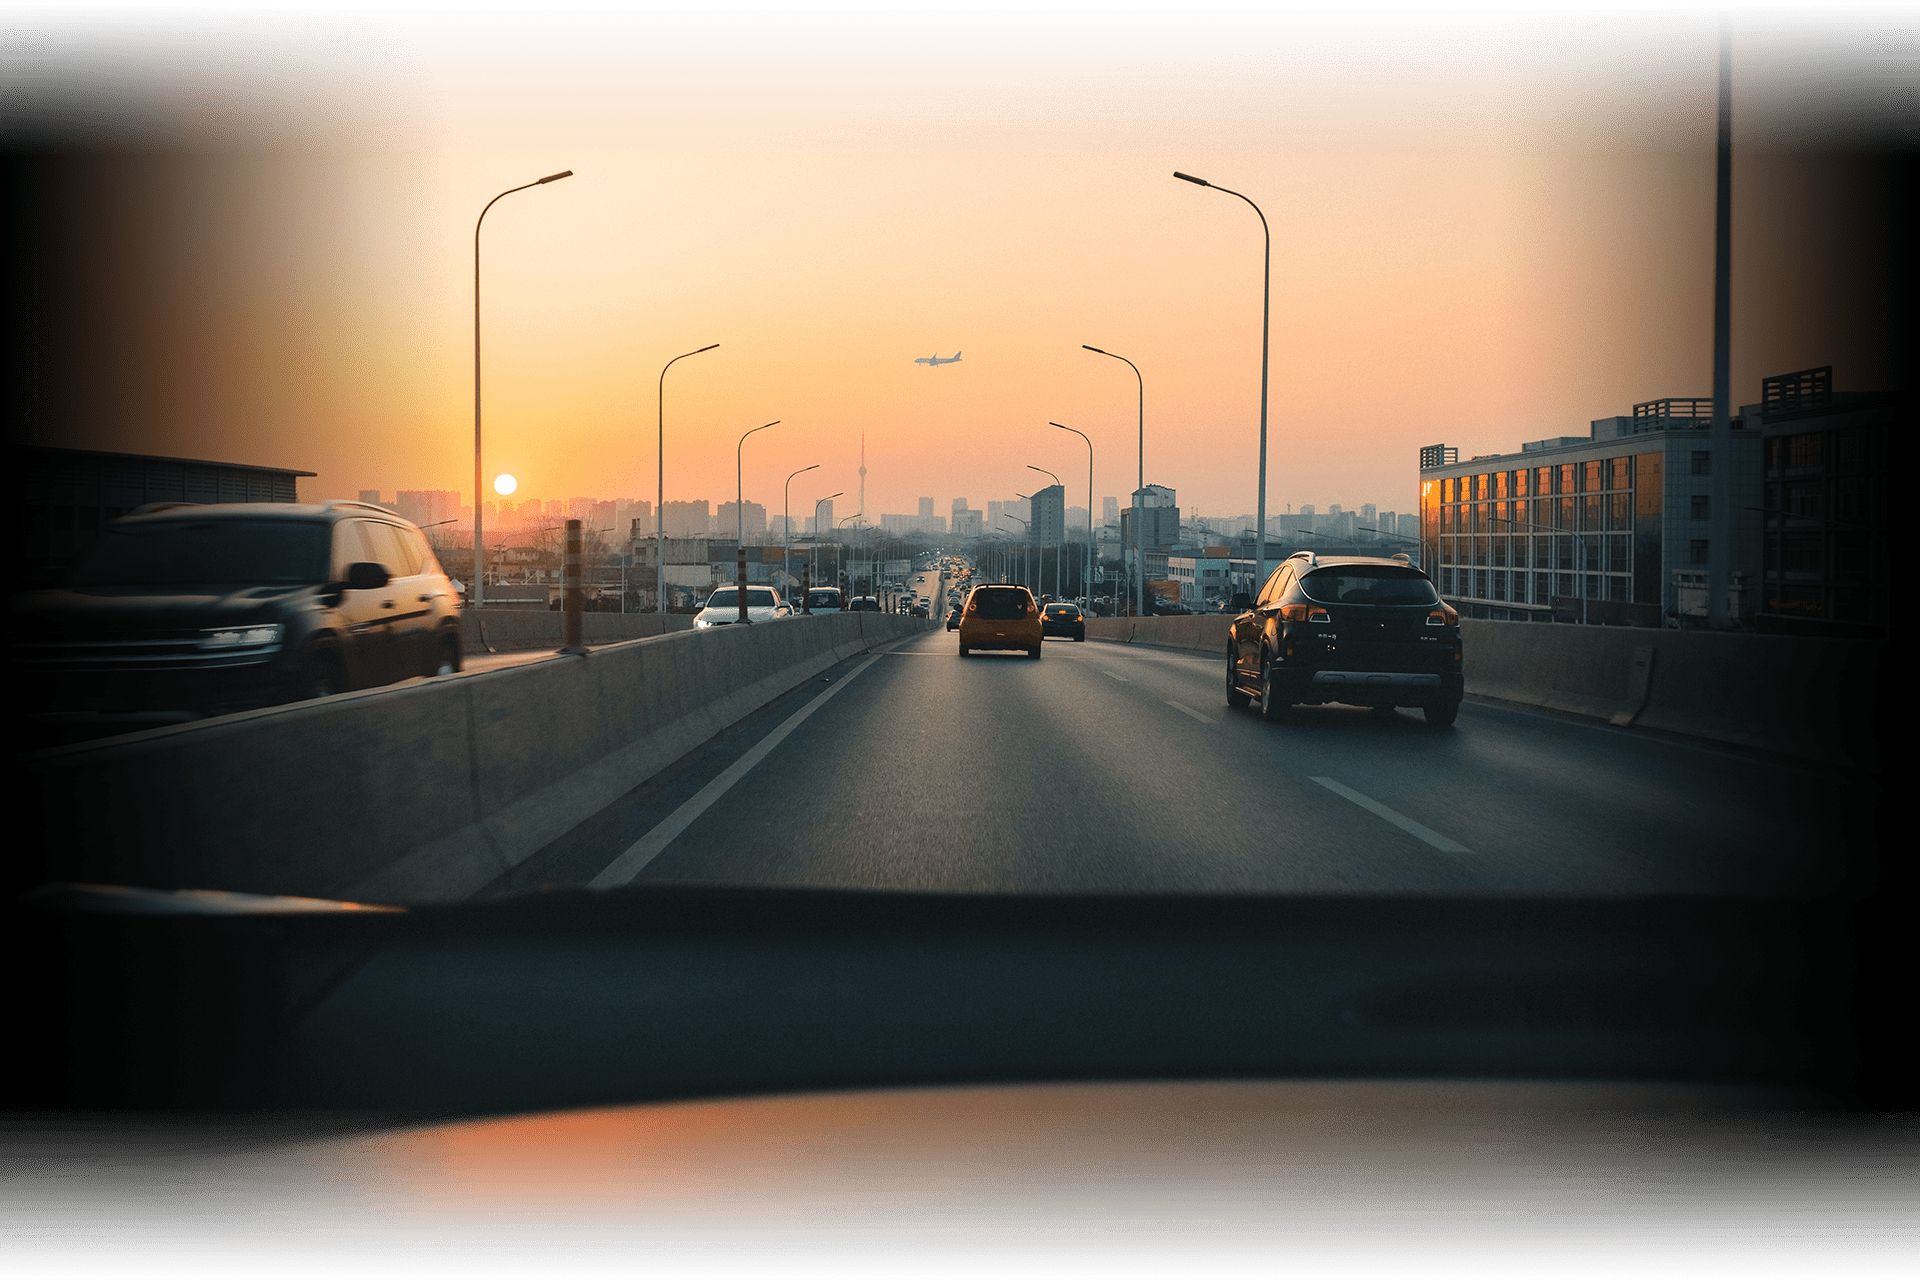 a view out the windshield of a vehicle heading into the destination city during a sunset on a highway with an abstract destination marker at a distant